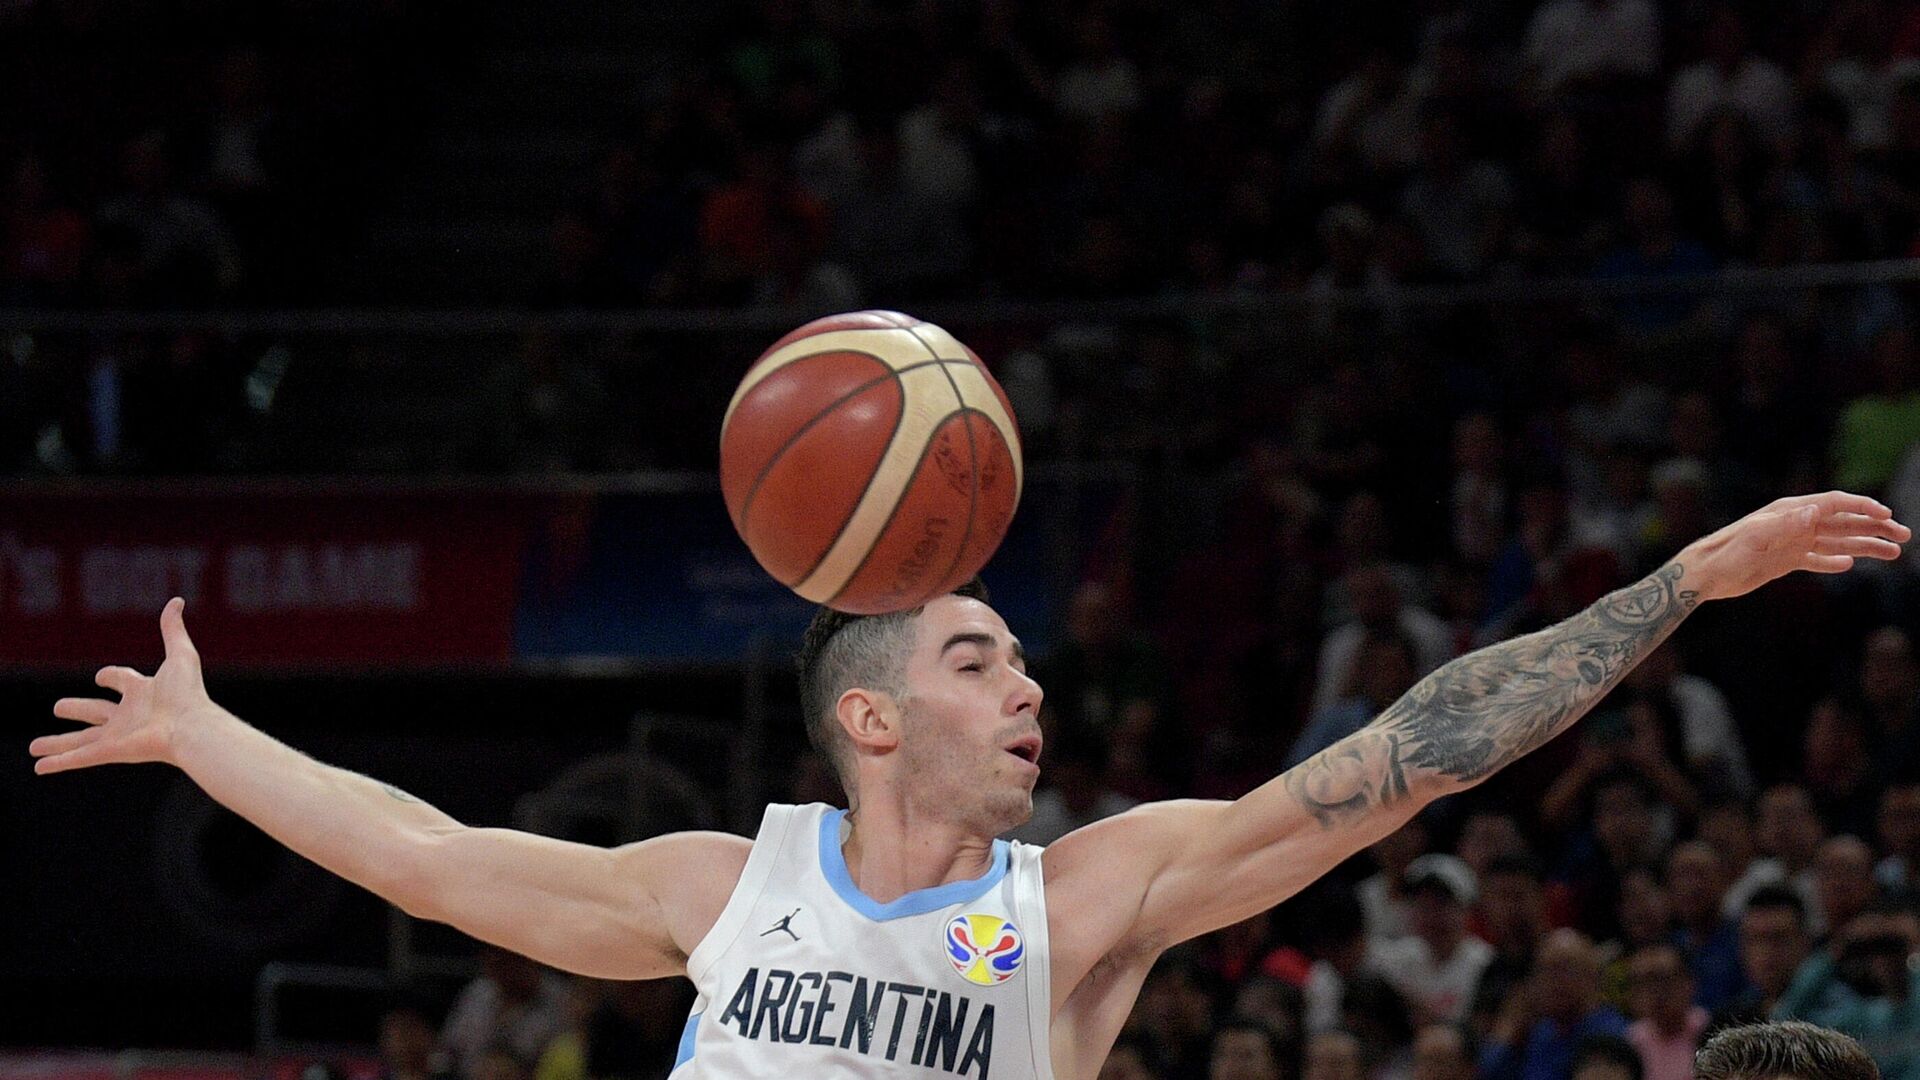 Argentina's Luca Vildoza goes for the ball during the Basketball World Cup semi-final game between Argentina and France in Beijing on September 13, 2019. (Photo by NOEL CELIS / AFP) - РИА Новости, 1920, 07.05.2021